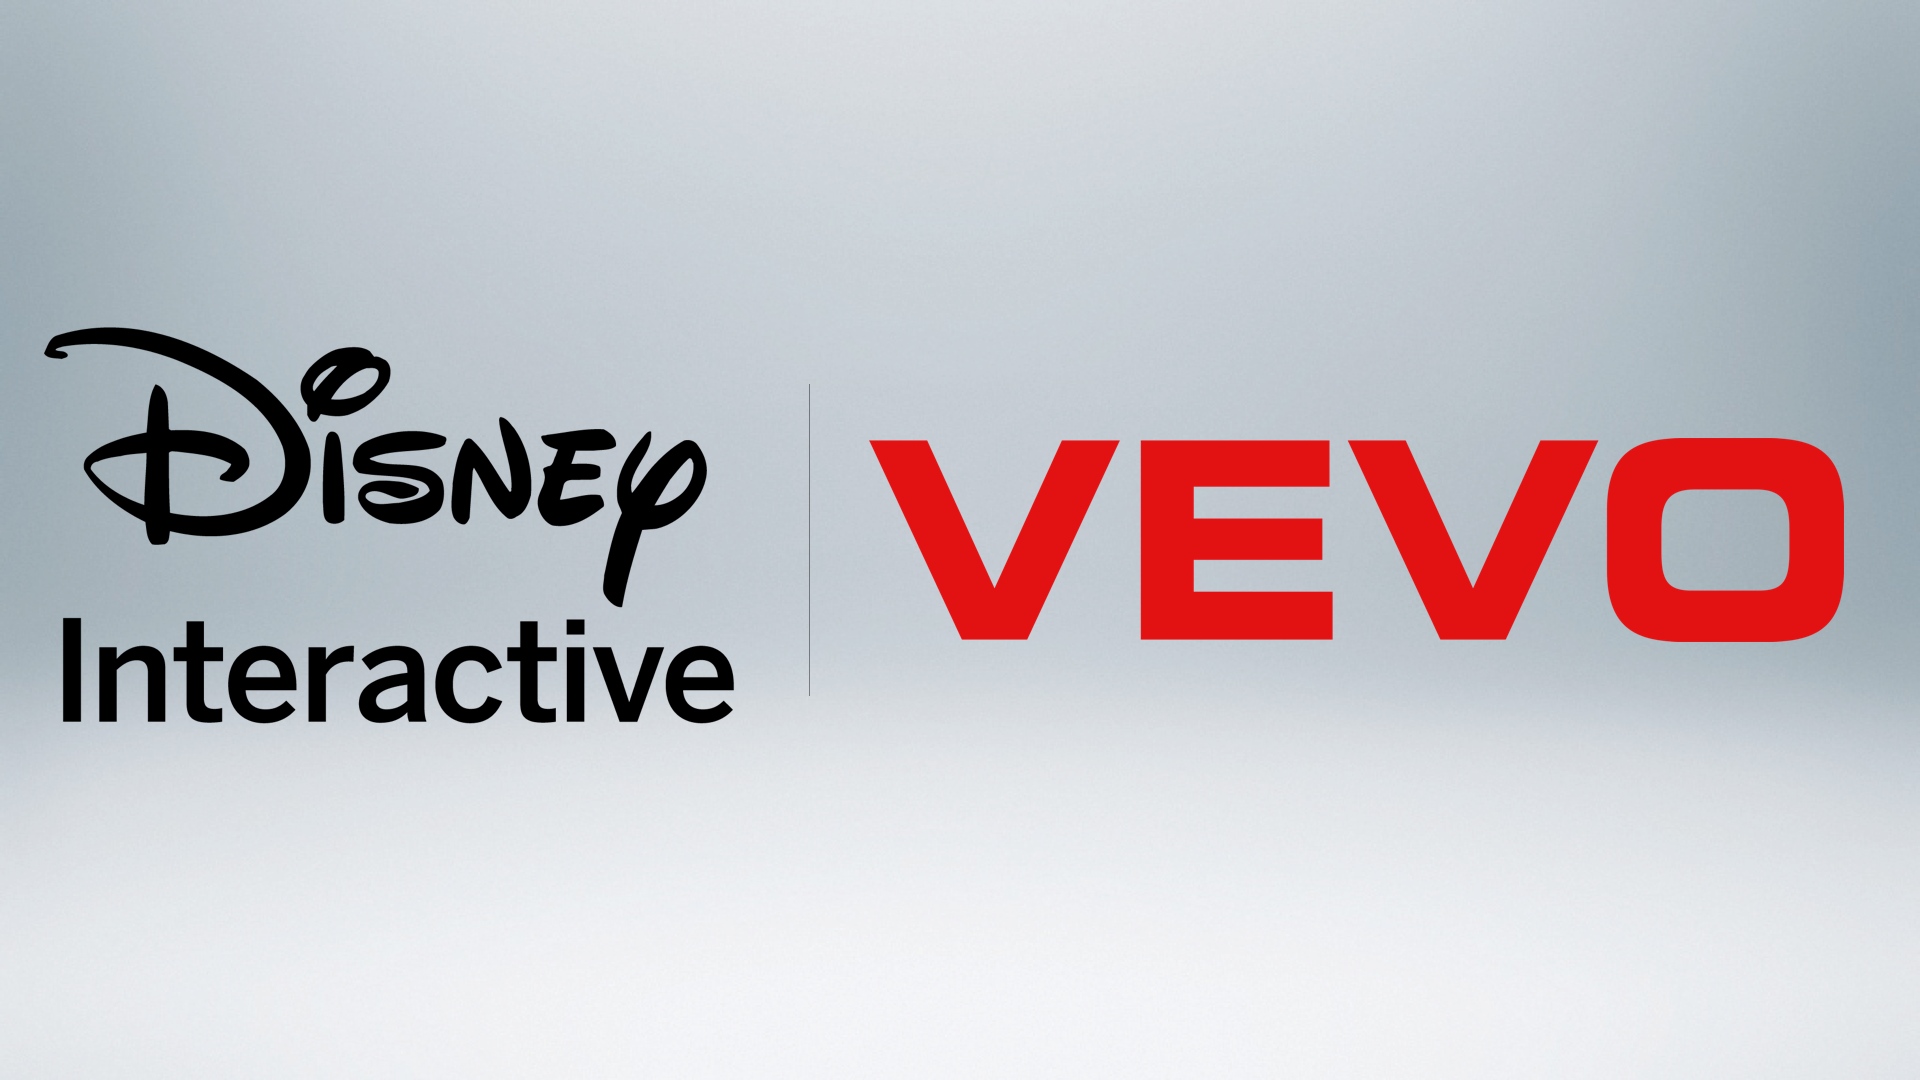 Disney Post: Disney Interactive and VEVO Make Music with New Online Video Destinations